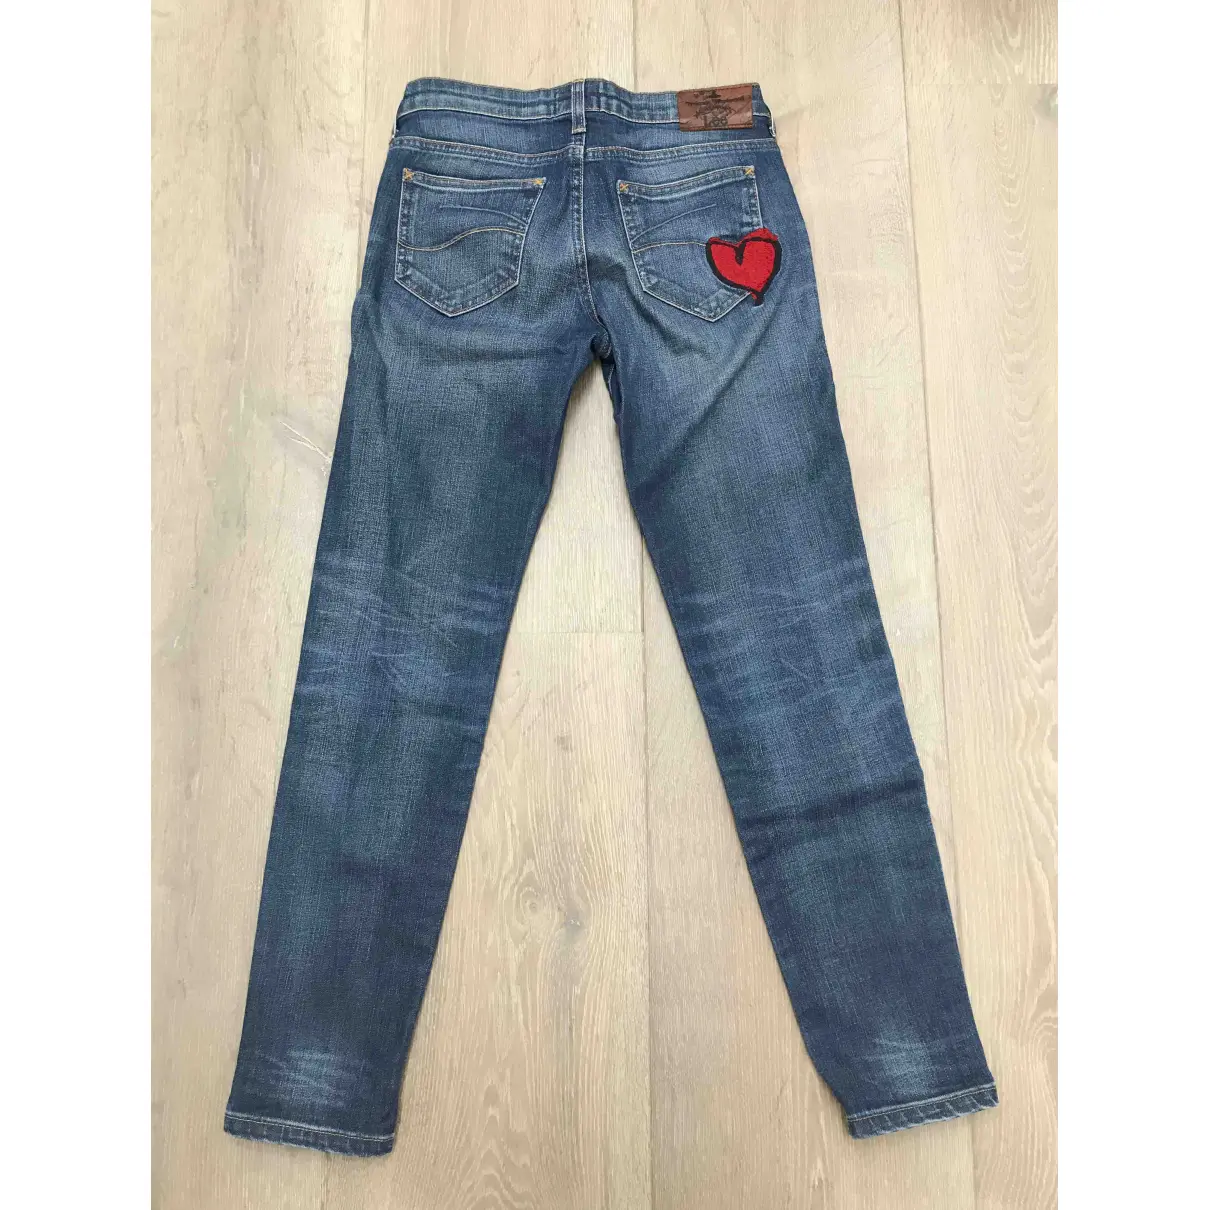 Buy Vivienne Westwood Anglomania Straight jeans online